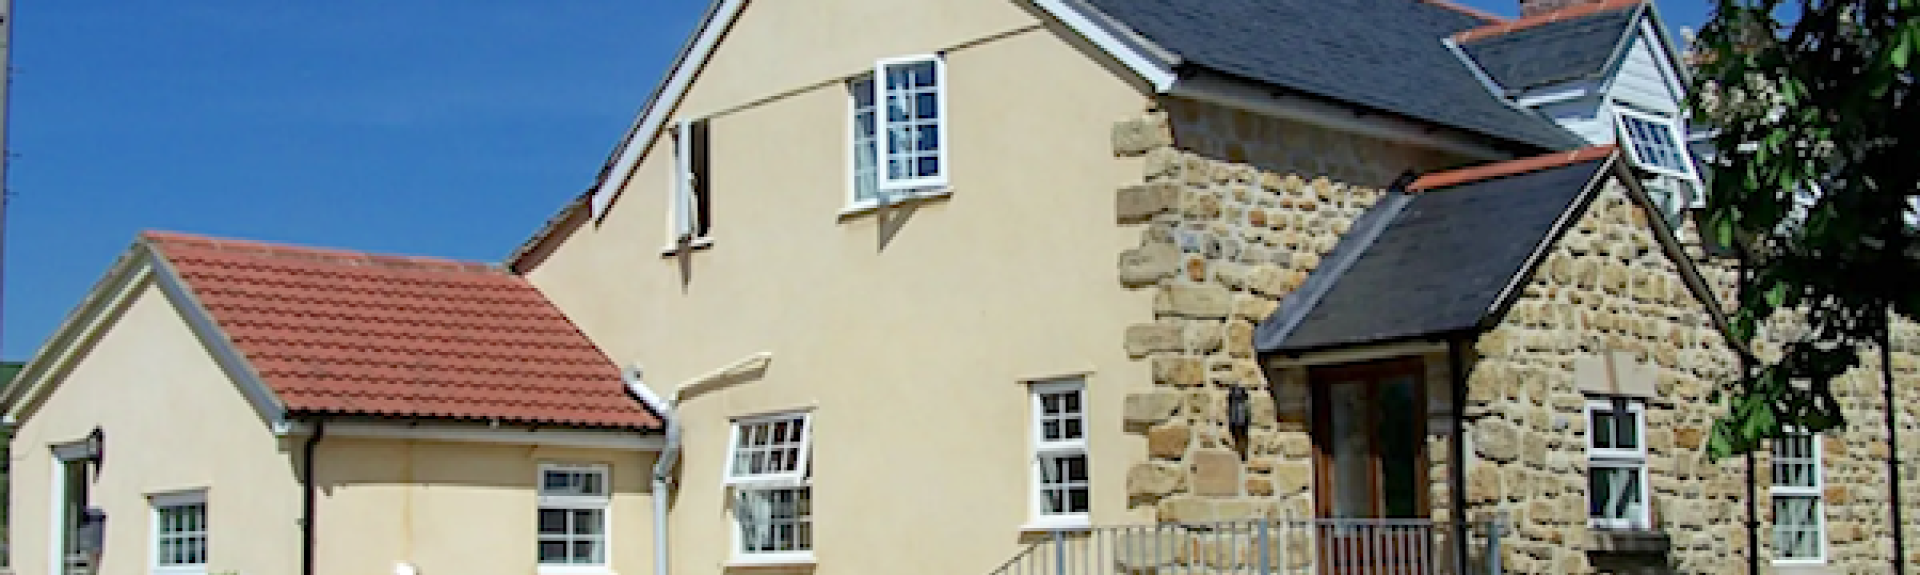 2-storey exterior of a stone-built, large Dorset holiday cottage